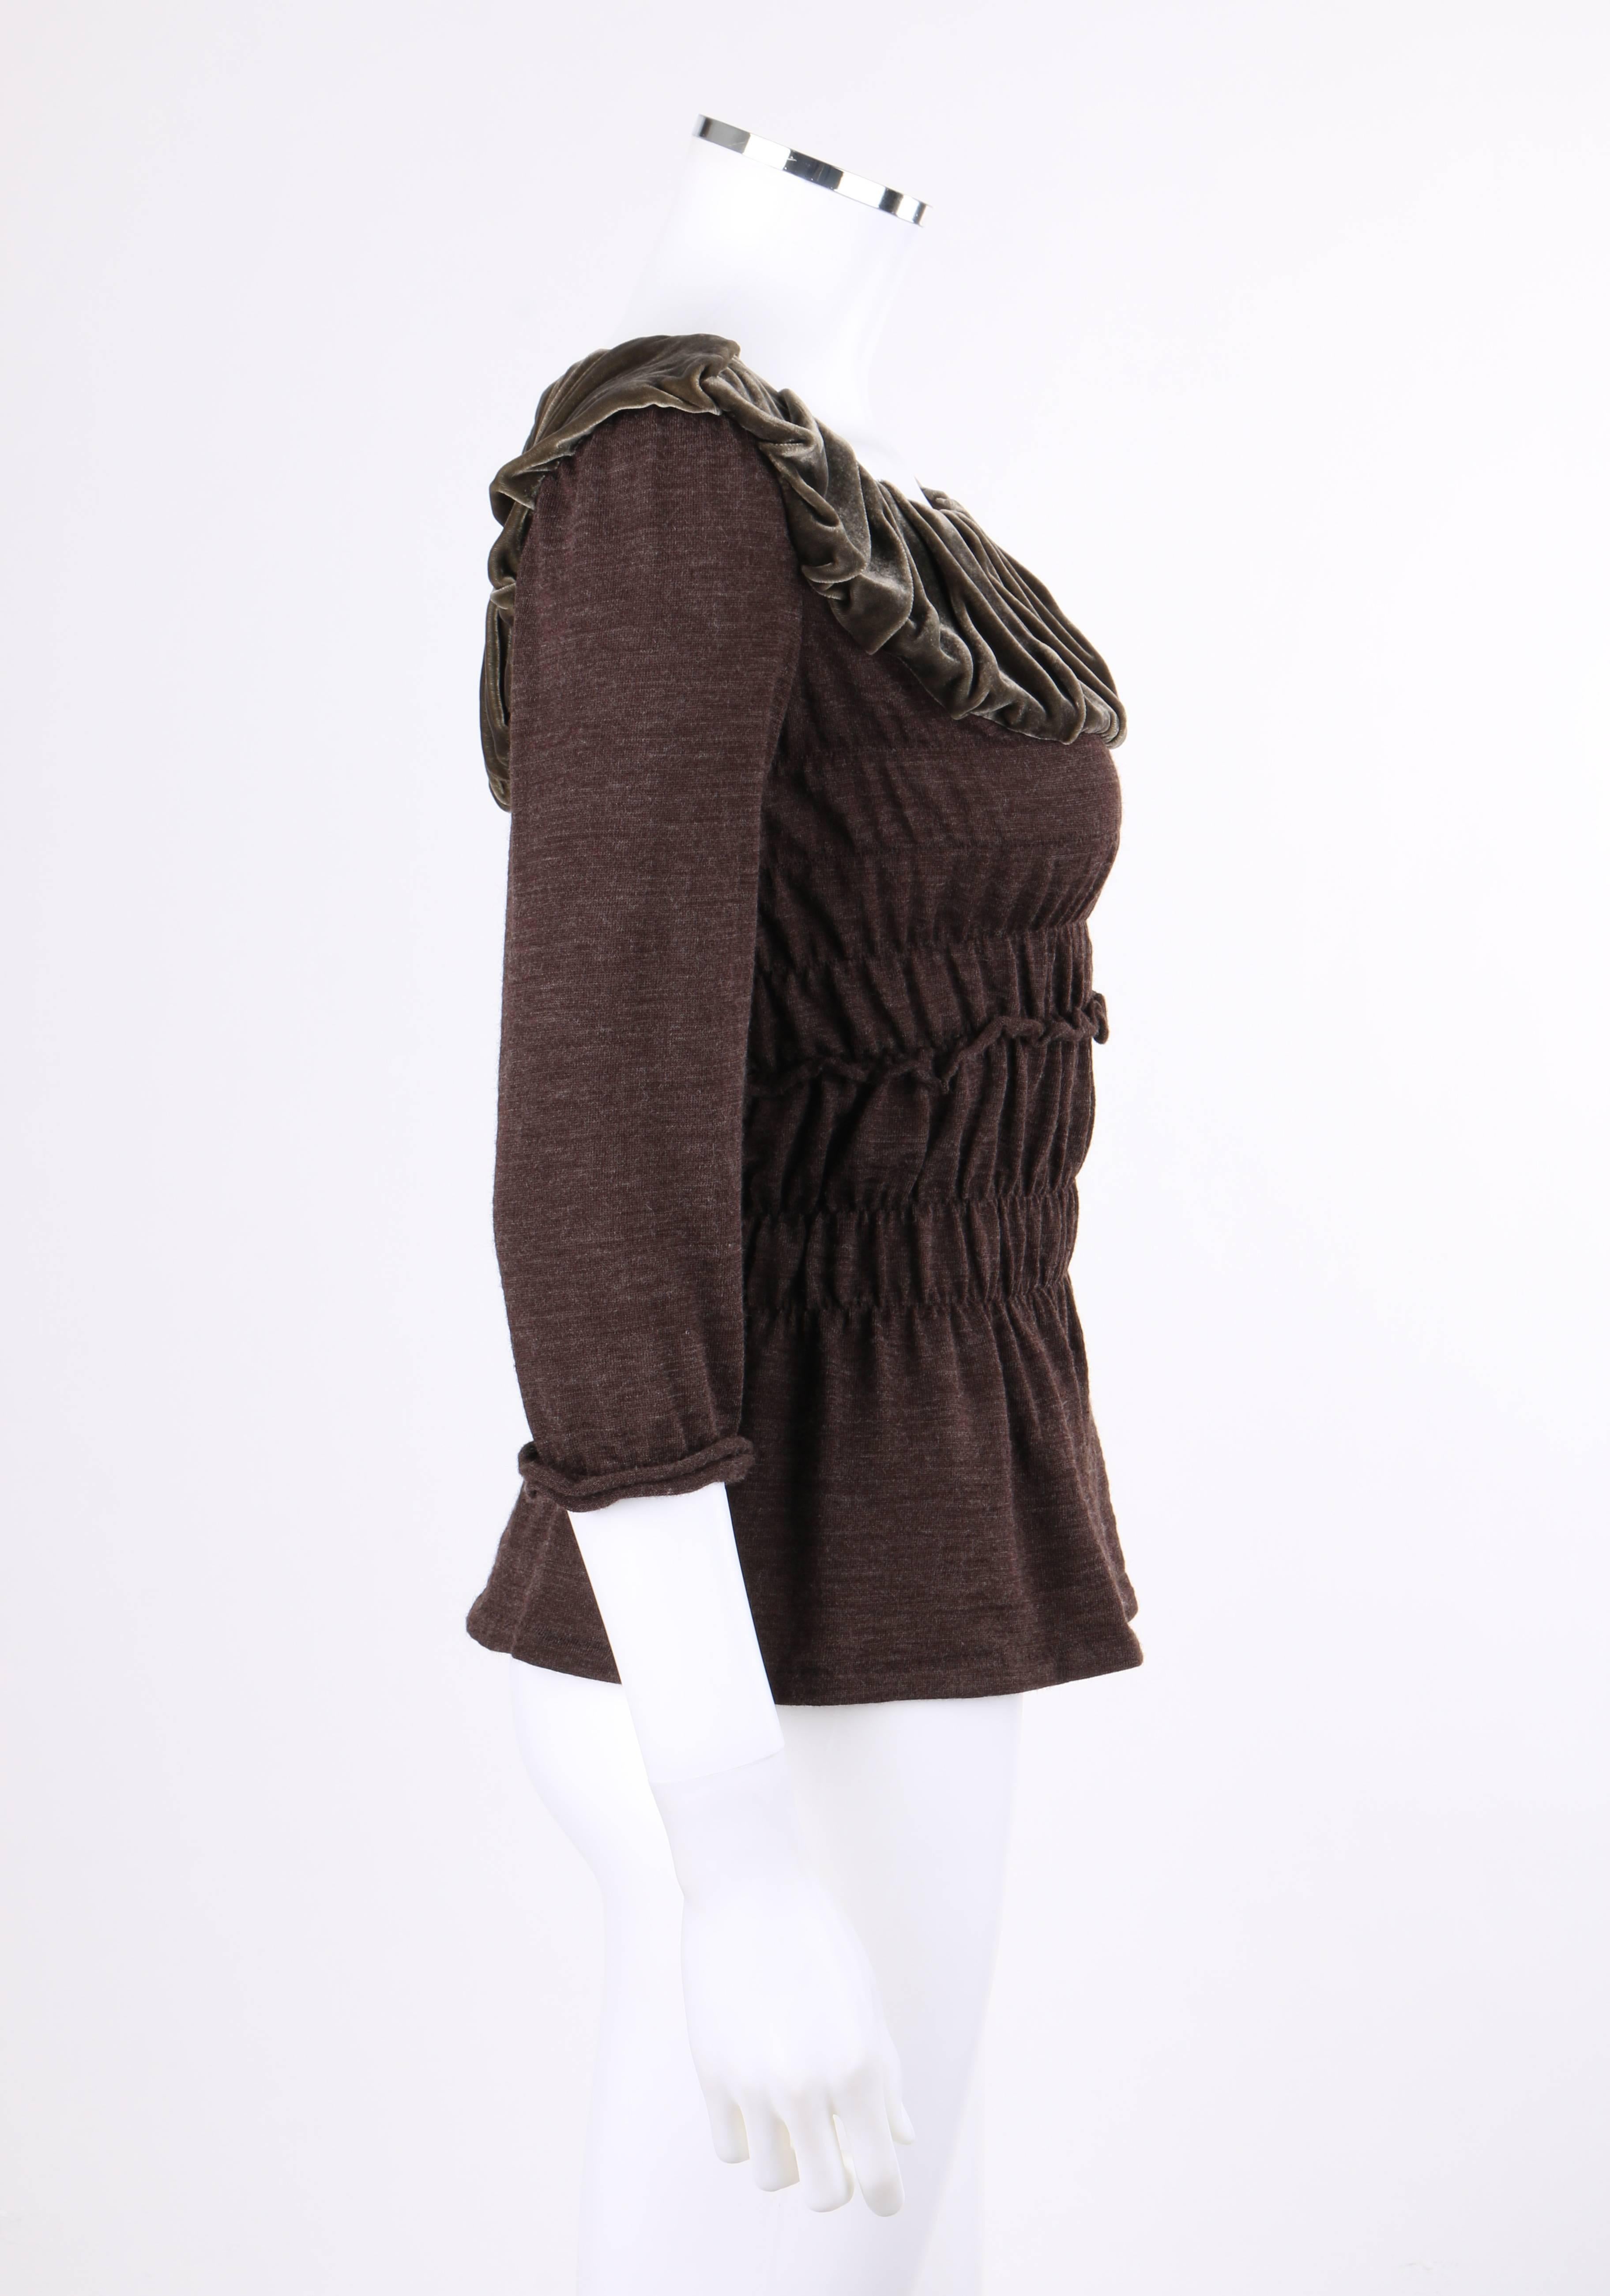 Black LOUIS VUITTON A/W 2006 Heathered Brown Wool Knit Velvet Detail Ruched Blouse Top